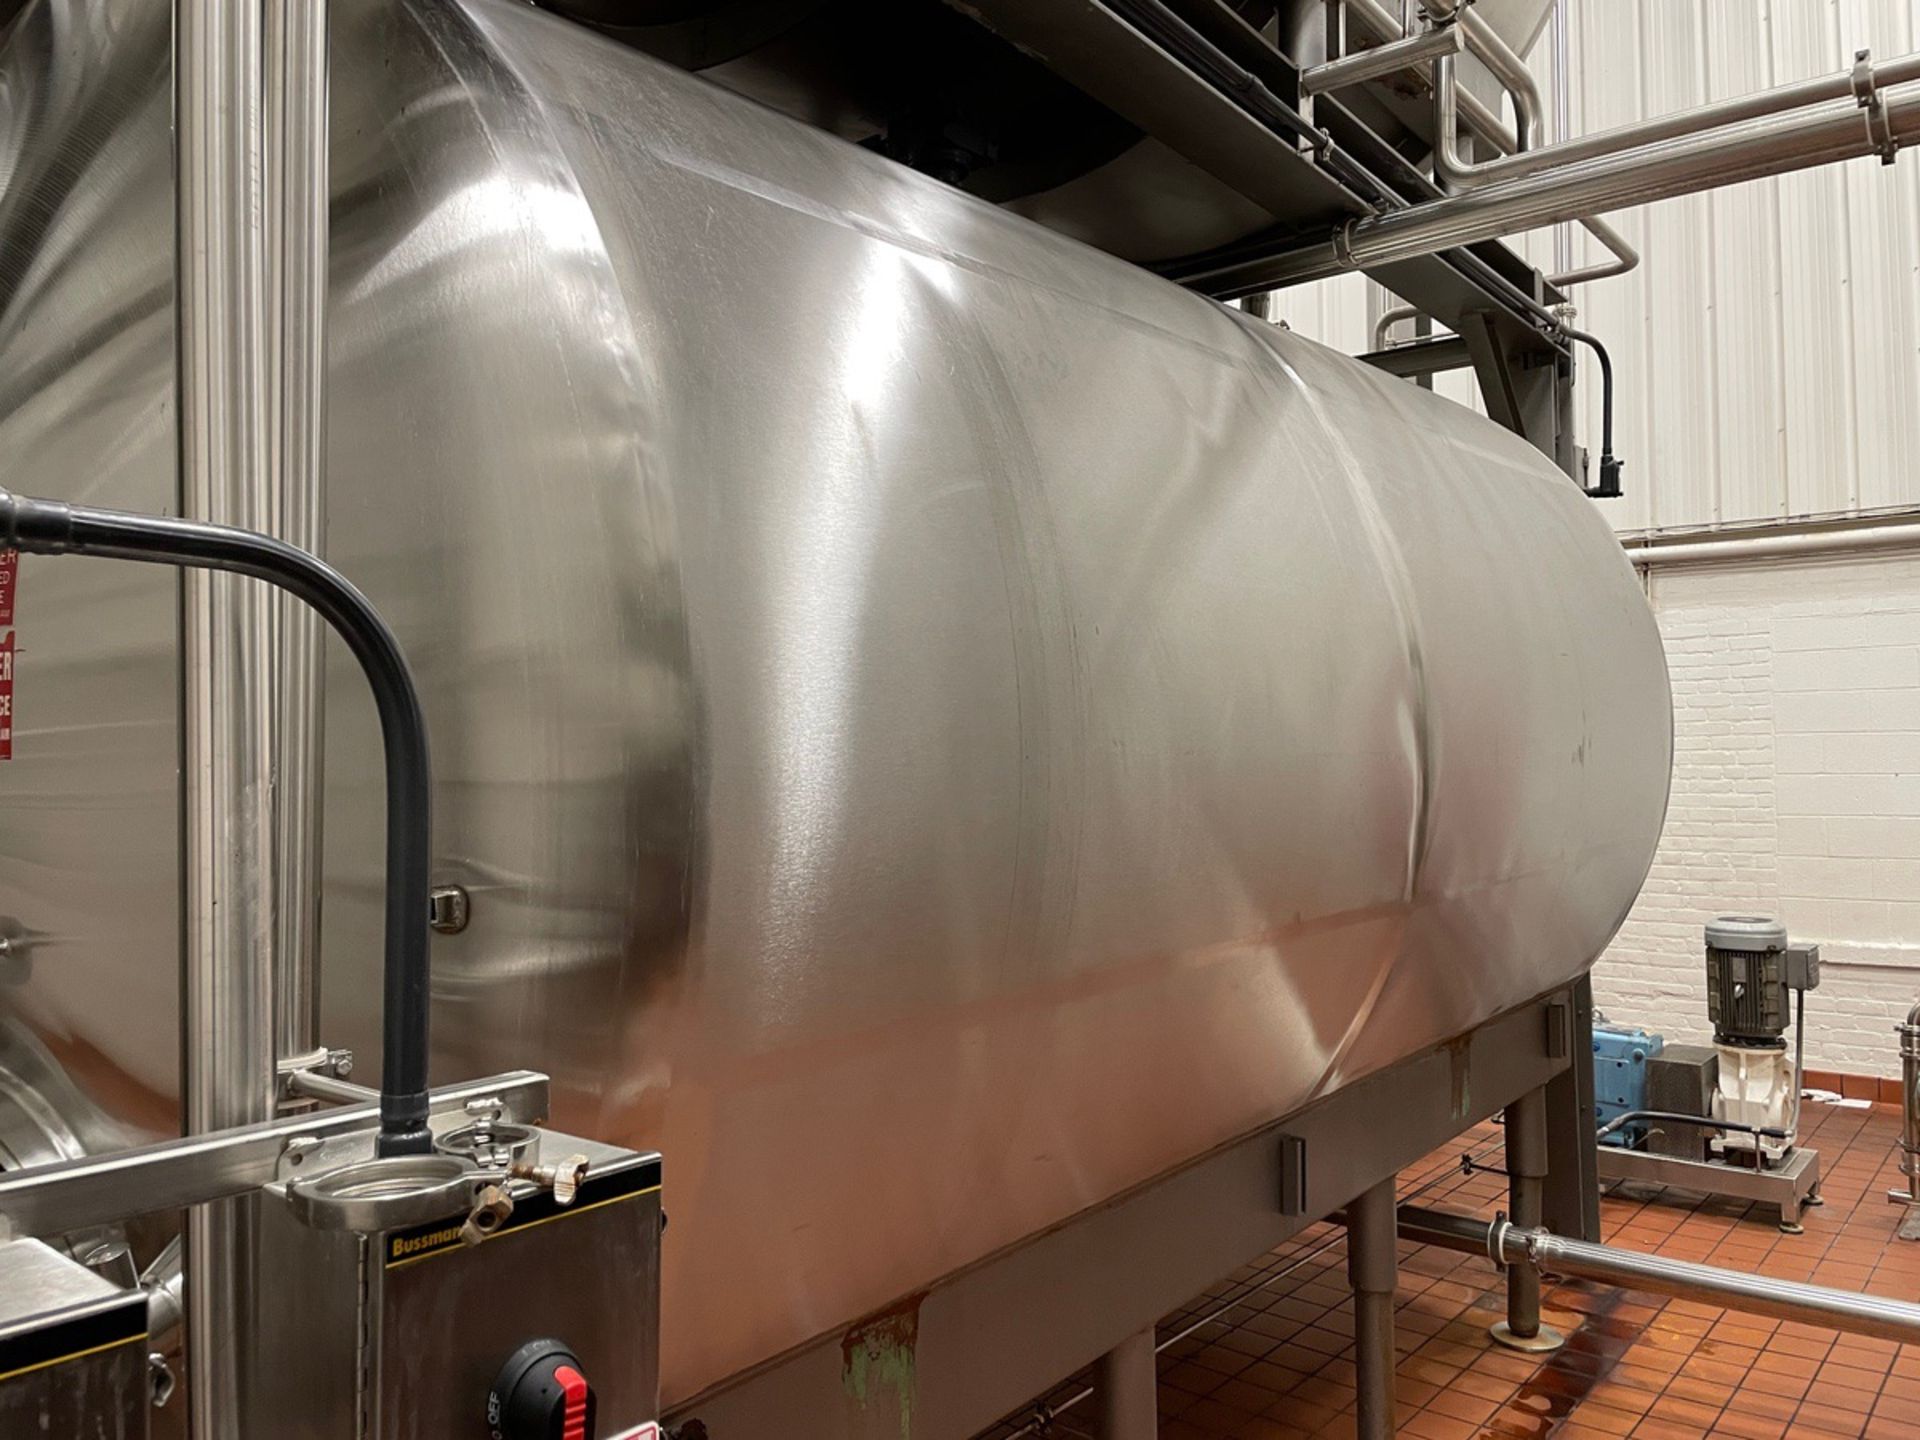 Creamery Package 5,300 Gallon Stainless Steel Horizontal Tank, Vertical Agitation, | Rig Fee: $3500 - Image 3 of 8